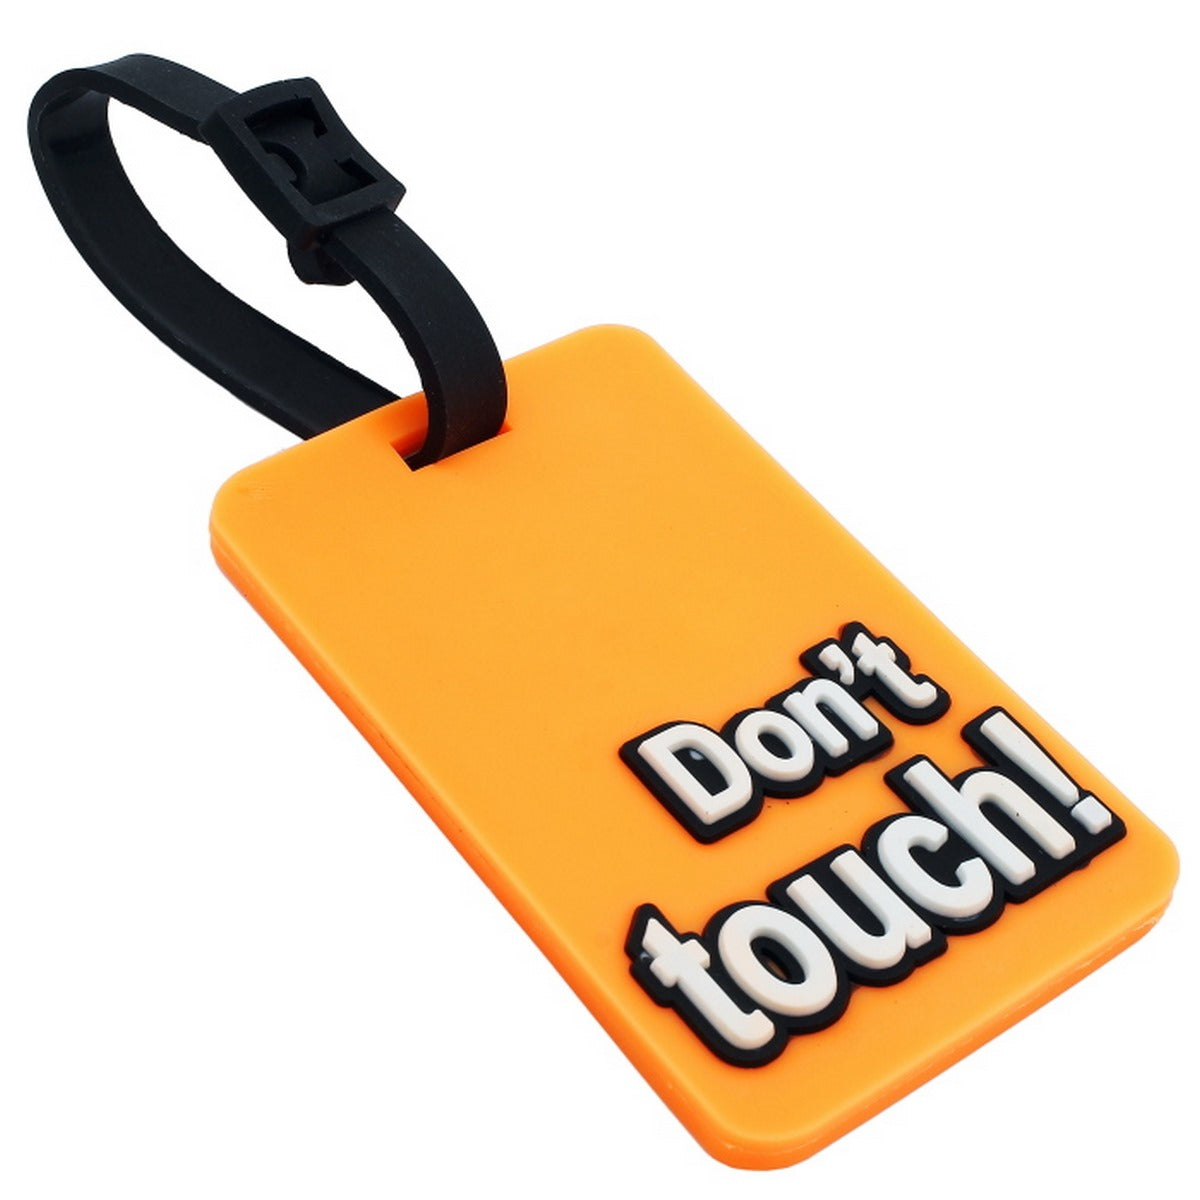 jags-mumbai Household Goods Luggage Tag Silicon Don't Touch